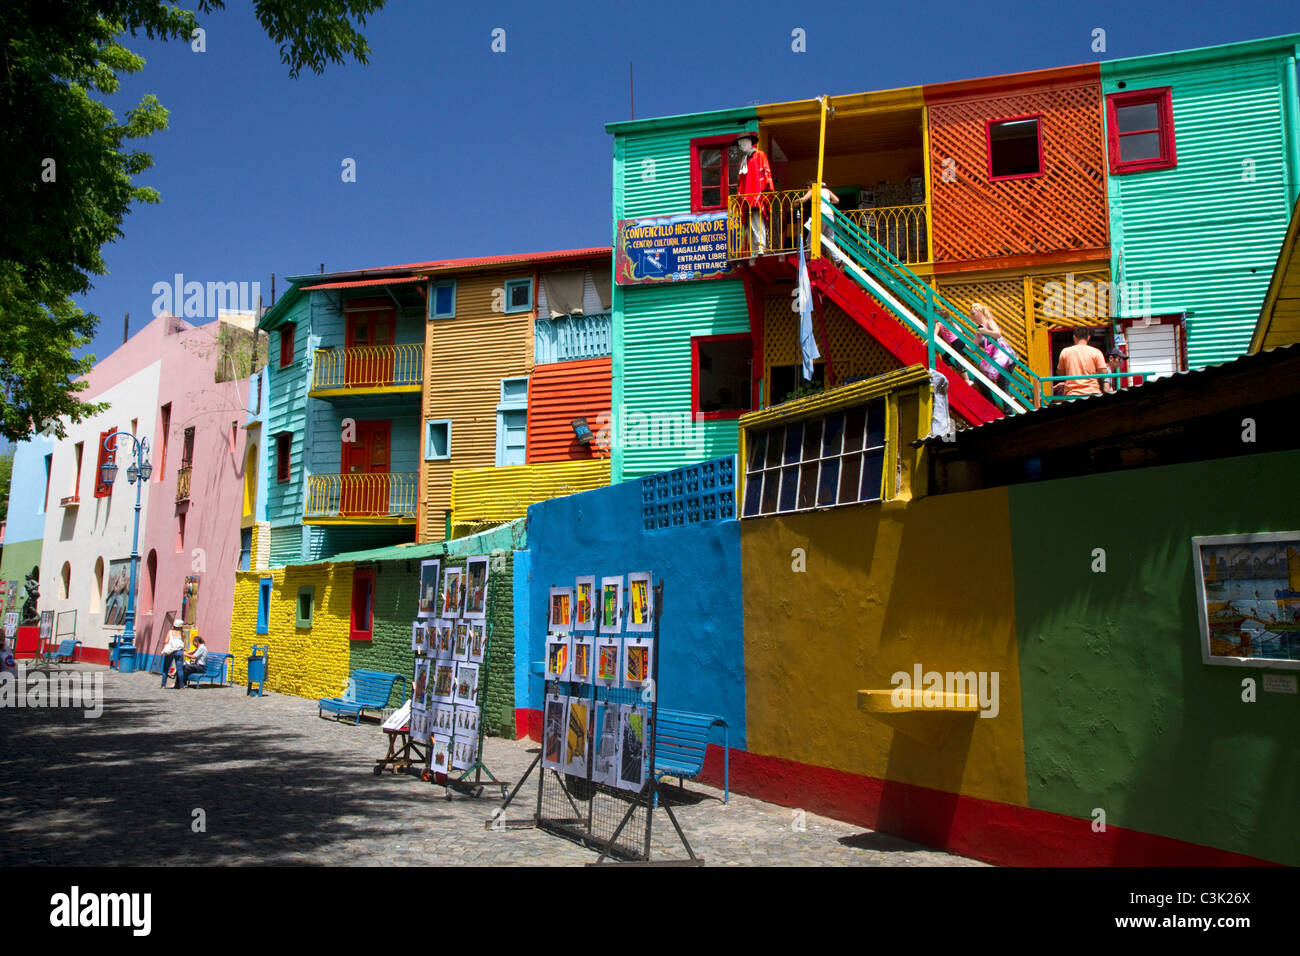 Colorful buildings in the La Boca area of Buenos Aires, Argentina. Stock Photo